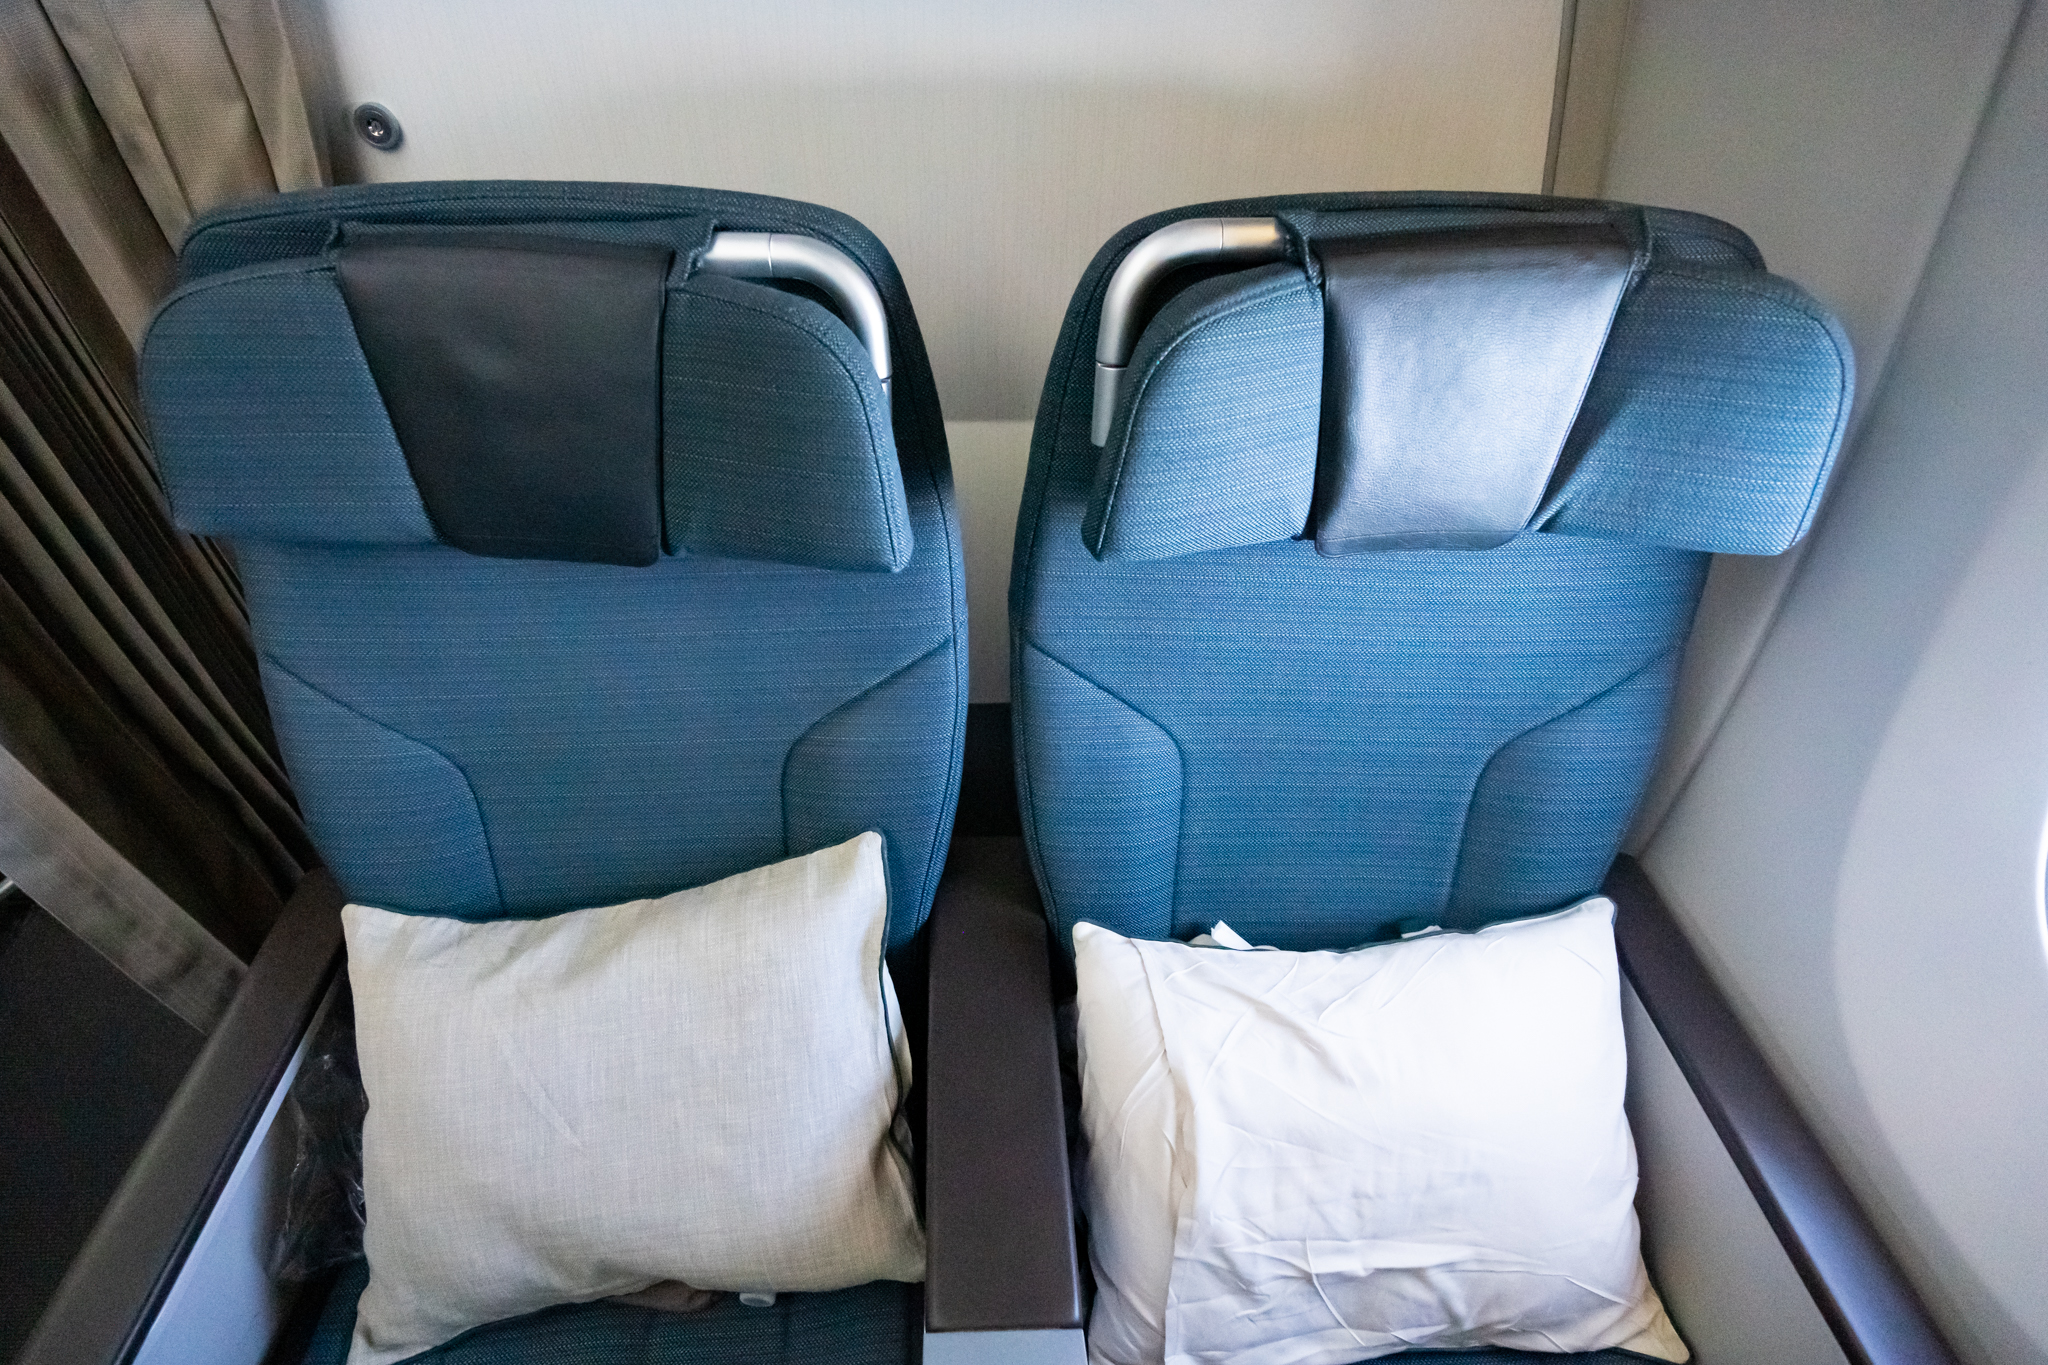 two seats with pillows on the side